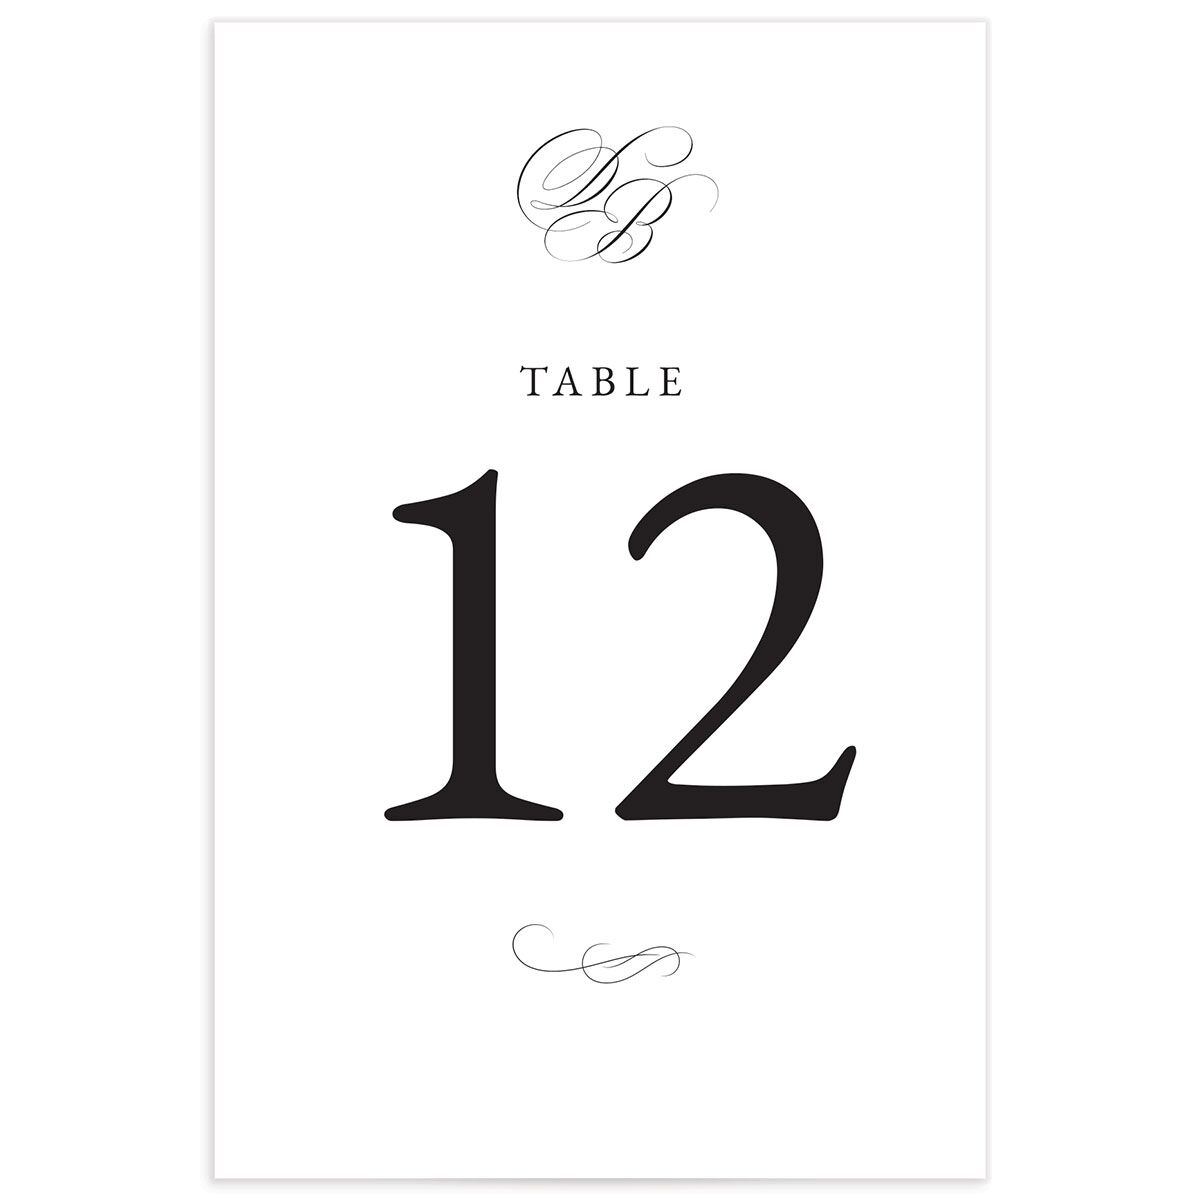 Traditional Elegance Table Numbers back in Pure White